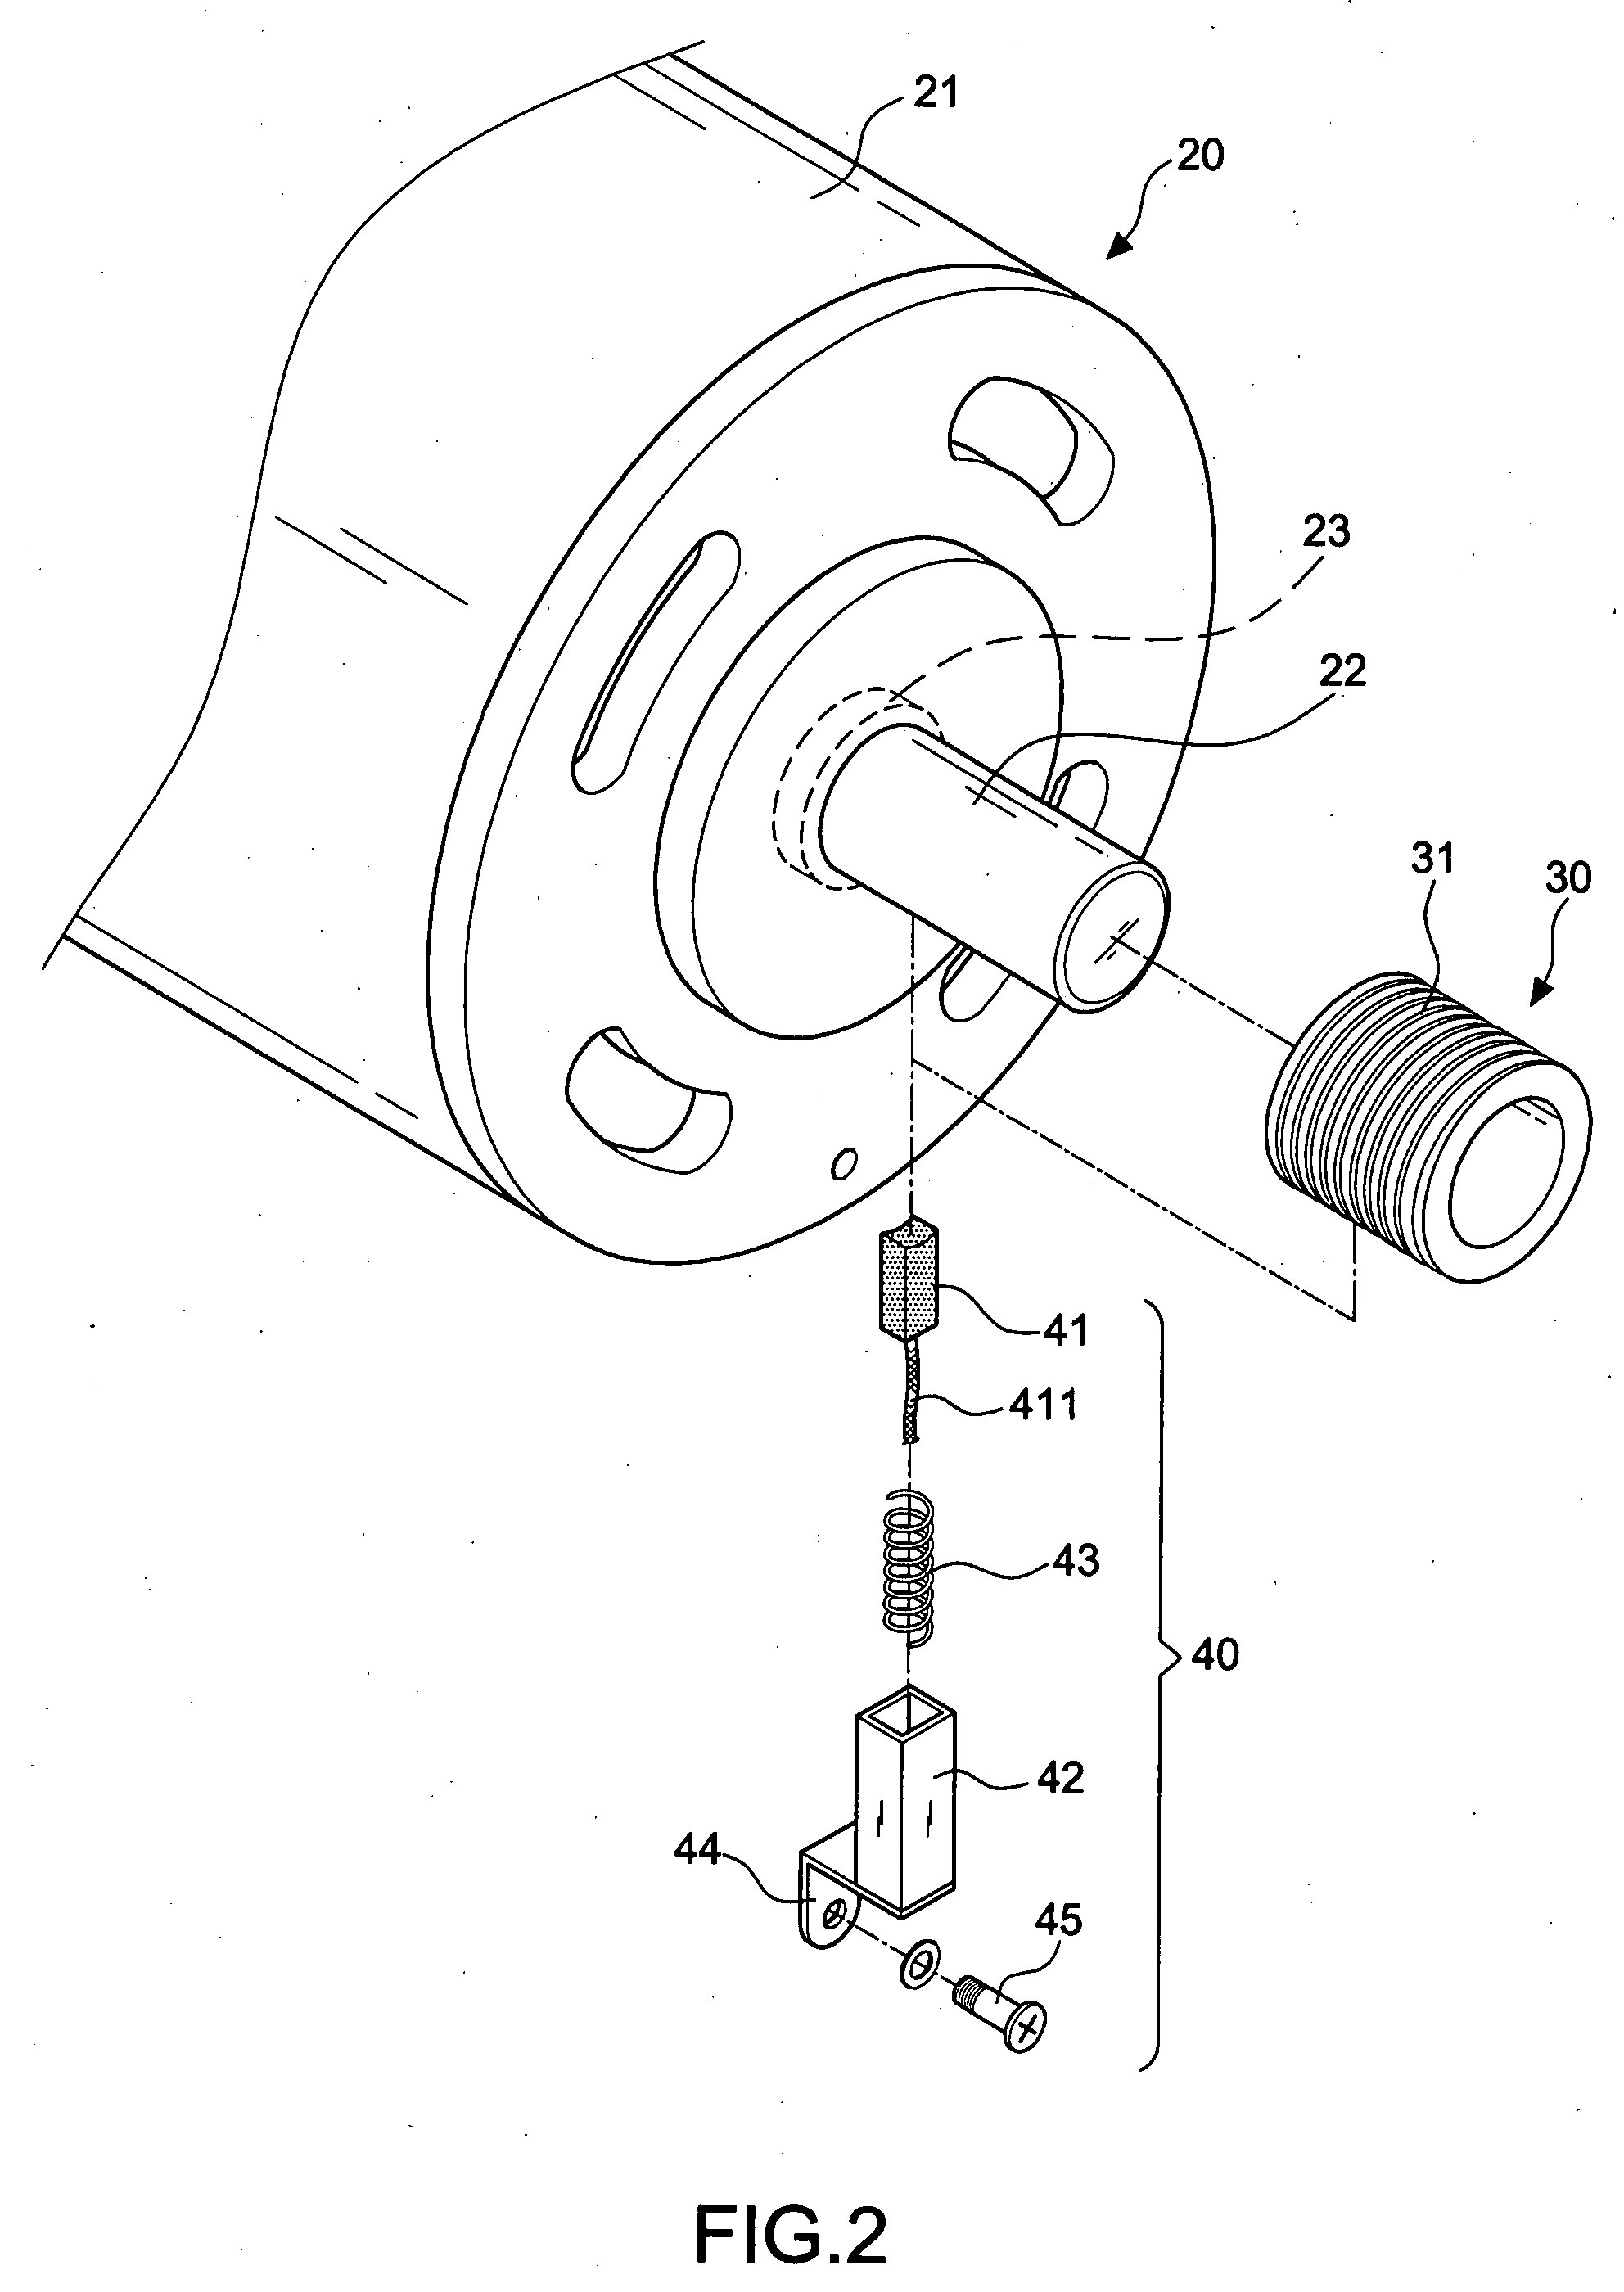 Shaft grounding thread structure of an electric motor